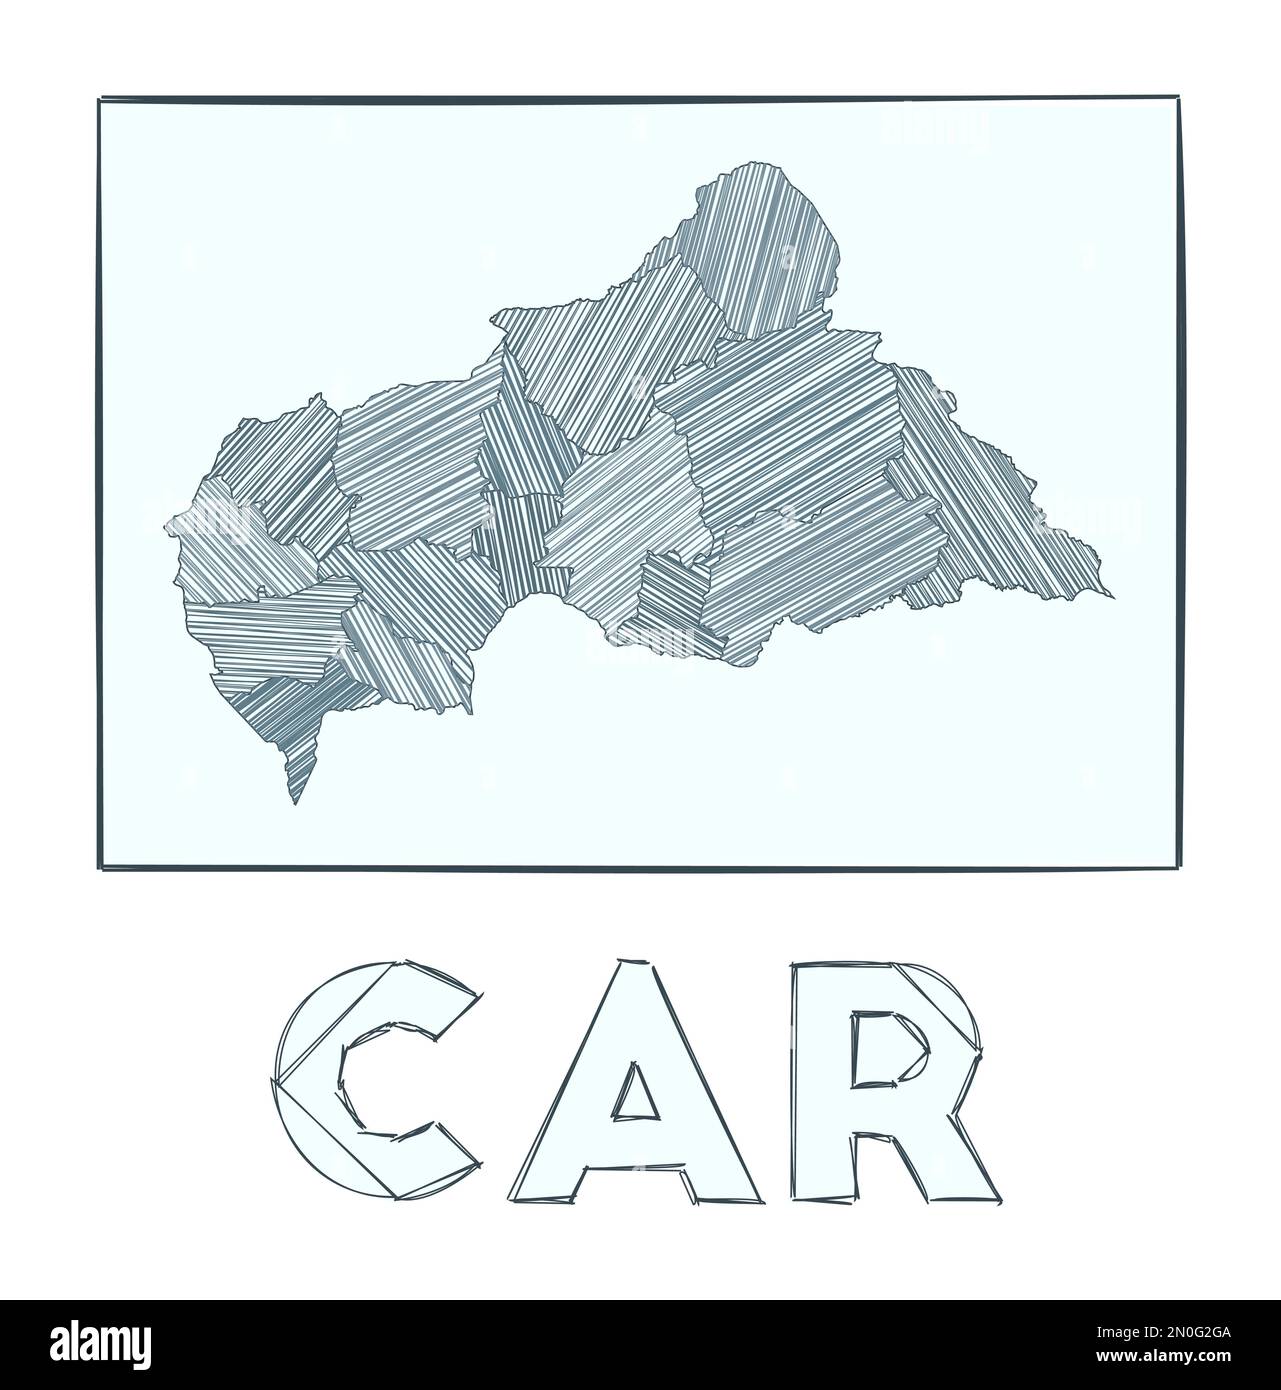 Sketch map of CAR. Grayscale hand drawn map of the country. Filled regions with hachure stripes. Vector illustration. Stock Vector